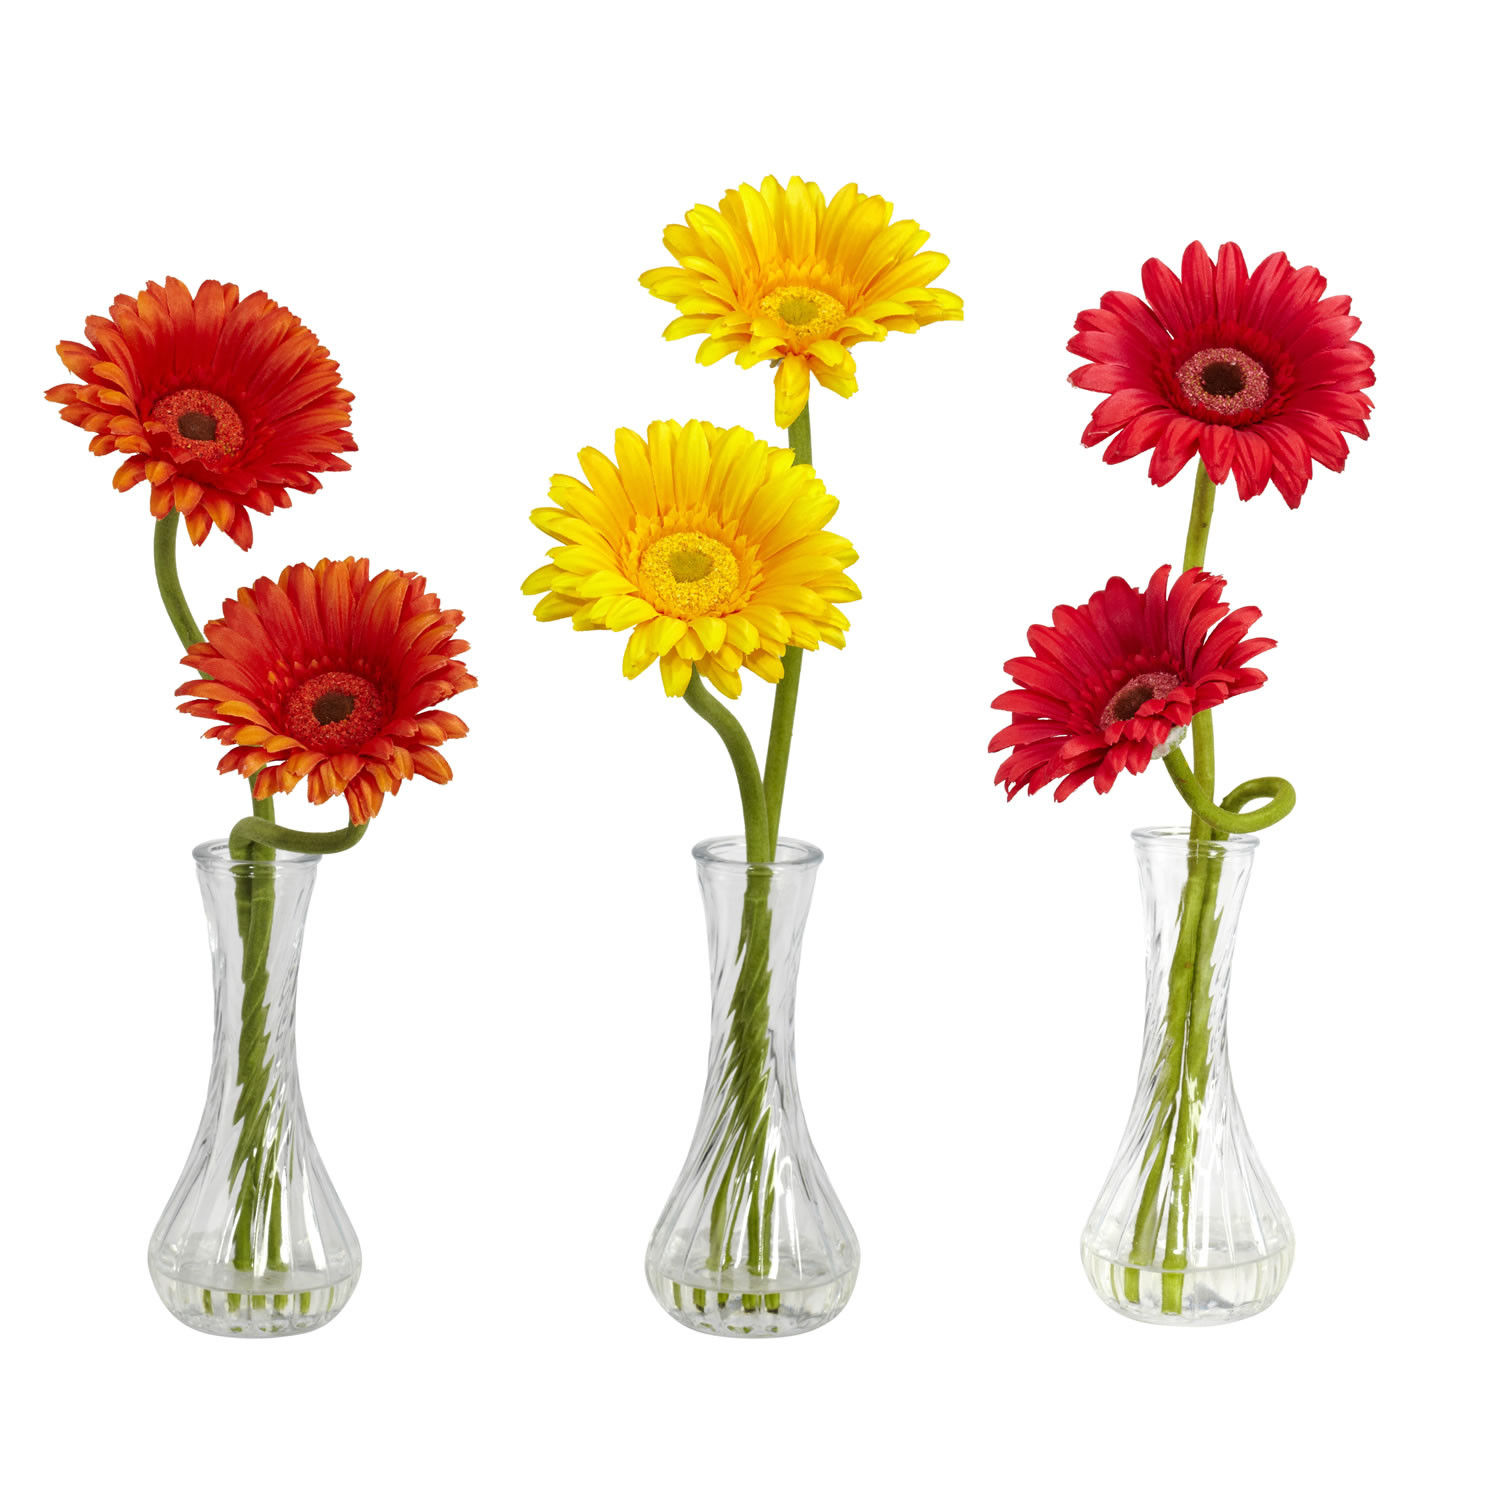 15 Fantastic Small Glass Bud Vases 2024 free download small glass bud vases of pictures of flowers in bud vases flowers healthy within gerber daisy w bud vase set of 3 silk specialties